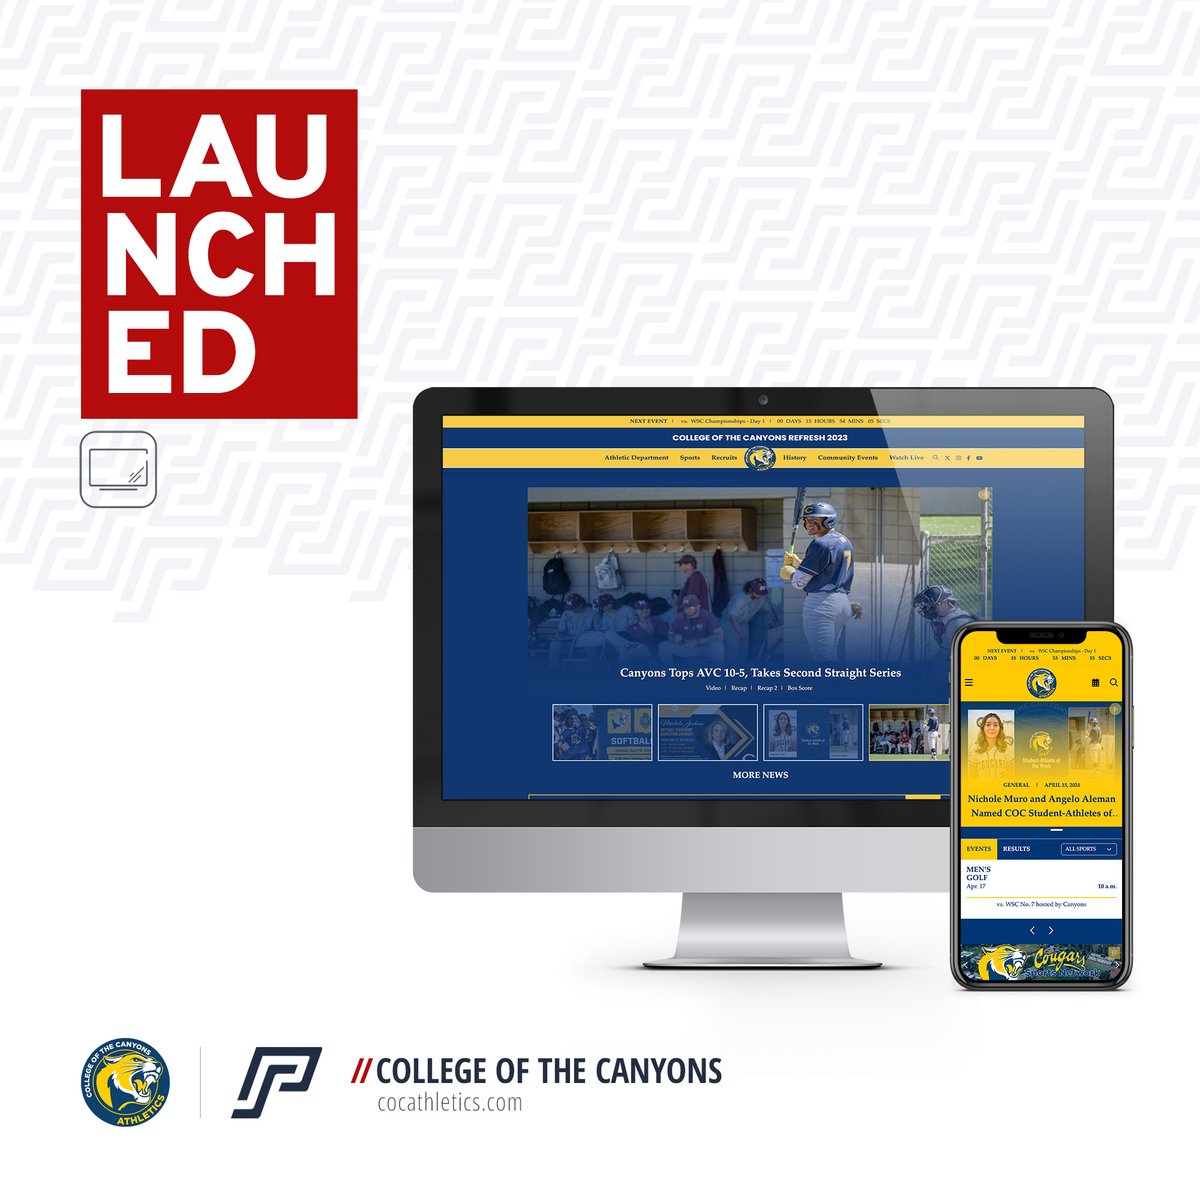 🚀 Launched! Check out the new site for @COCAthletics at cocathletics.com.